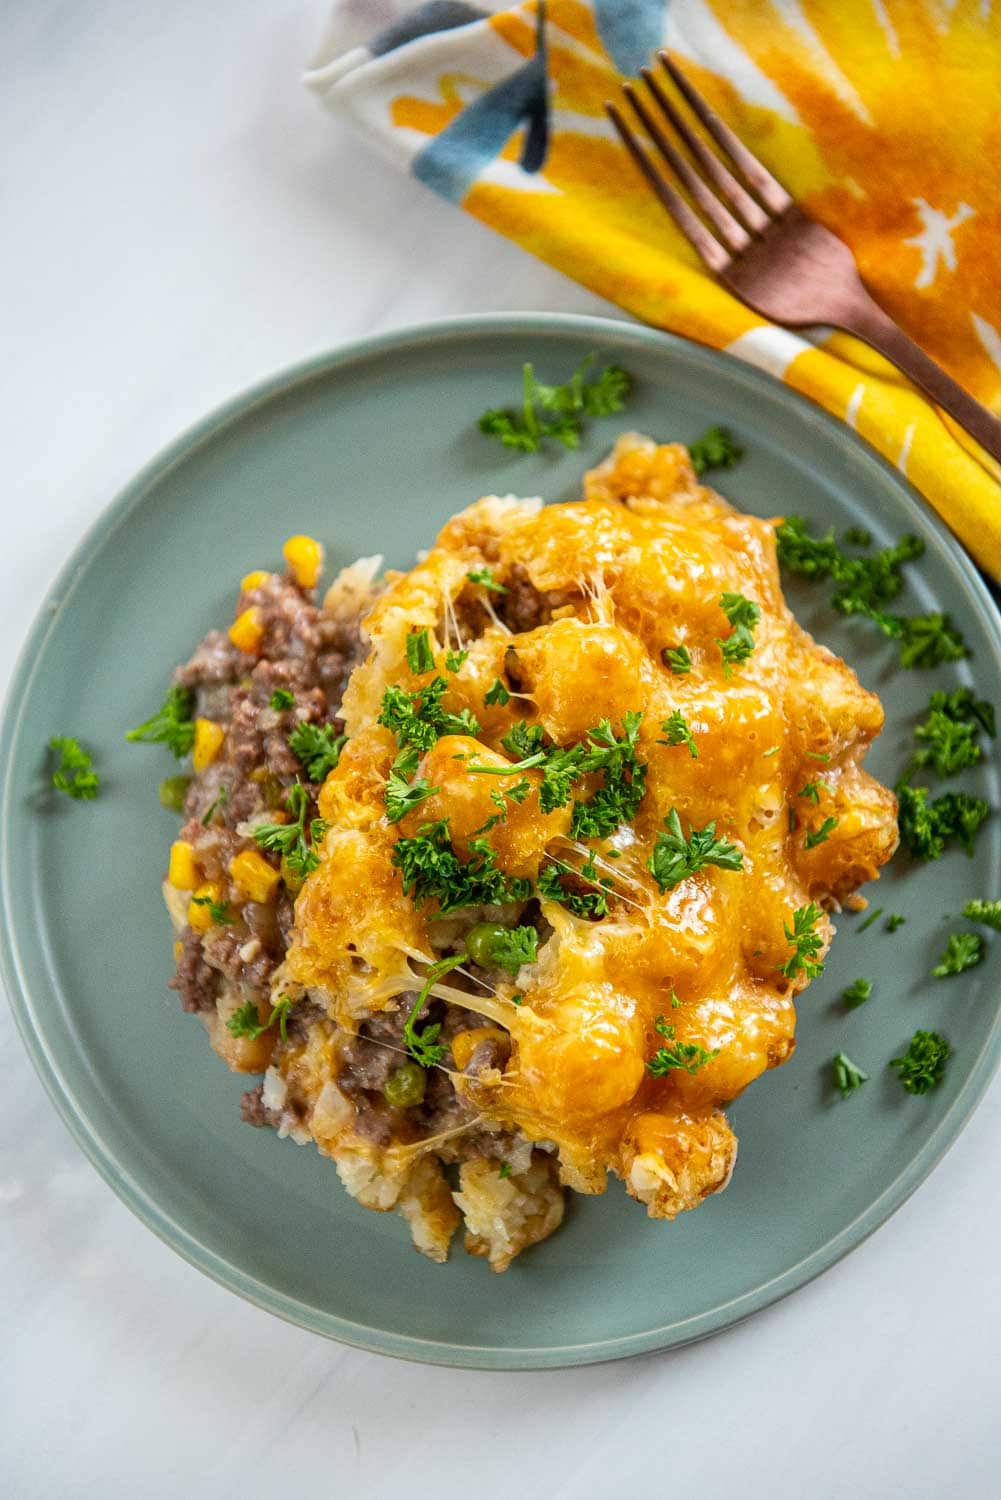 Slow Cooker Tater Tot Casserole served on plate and garnished